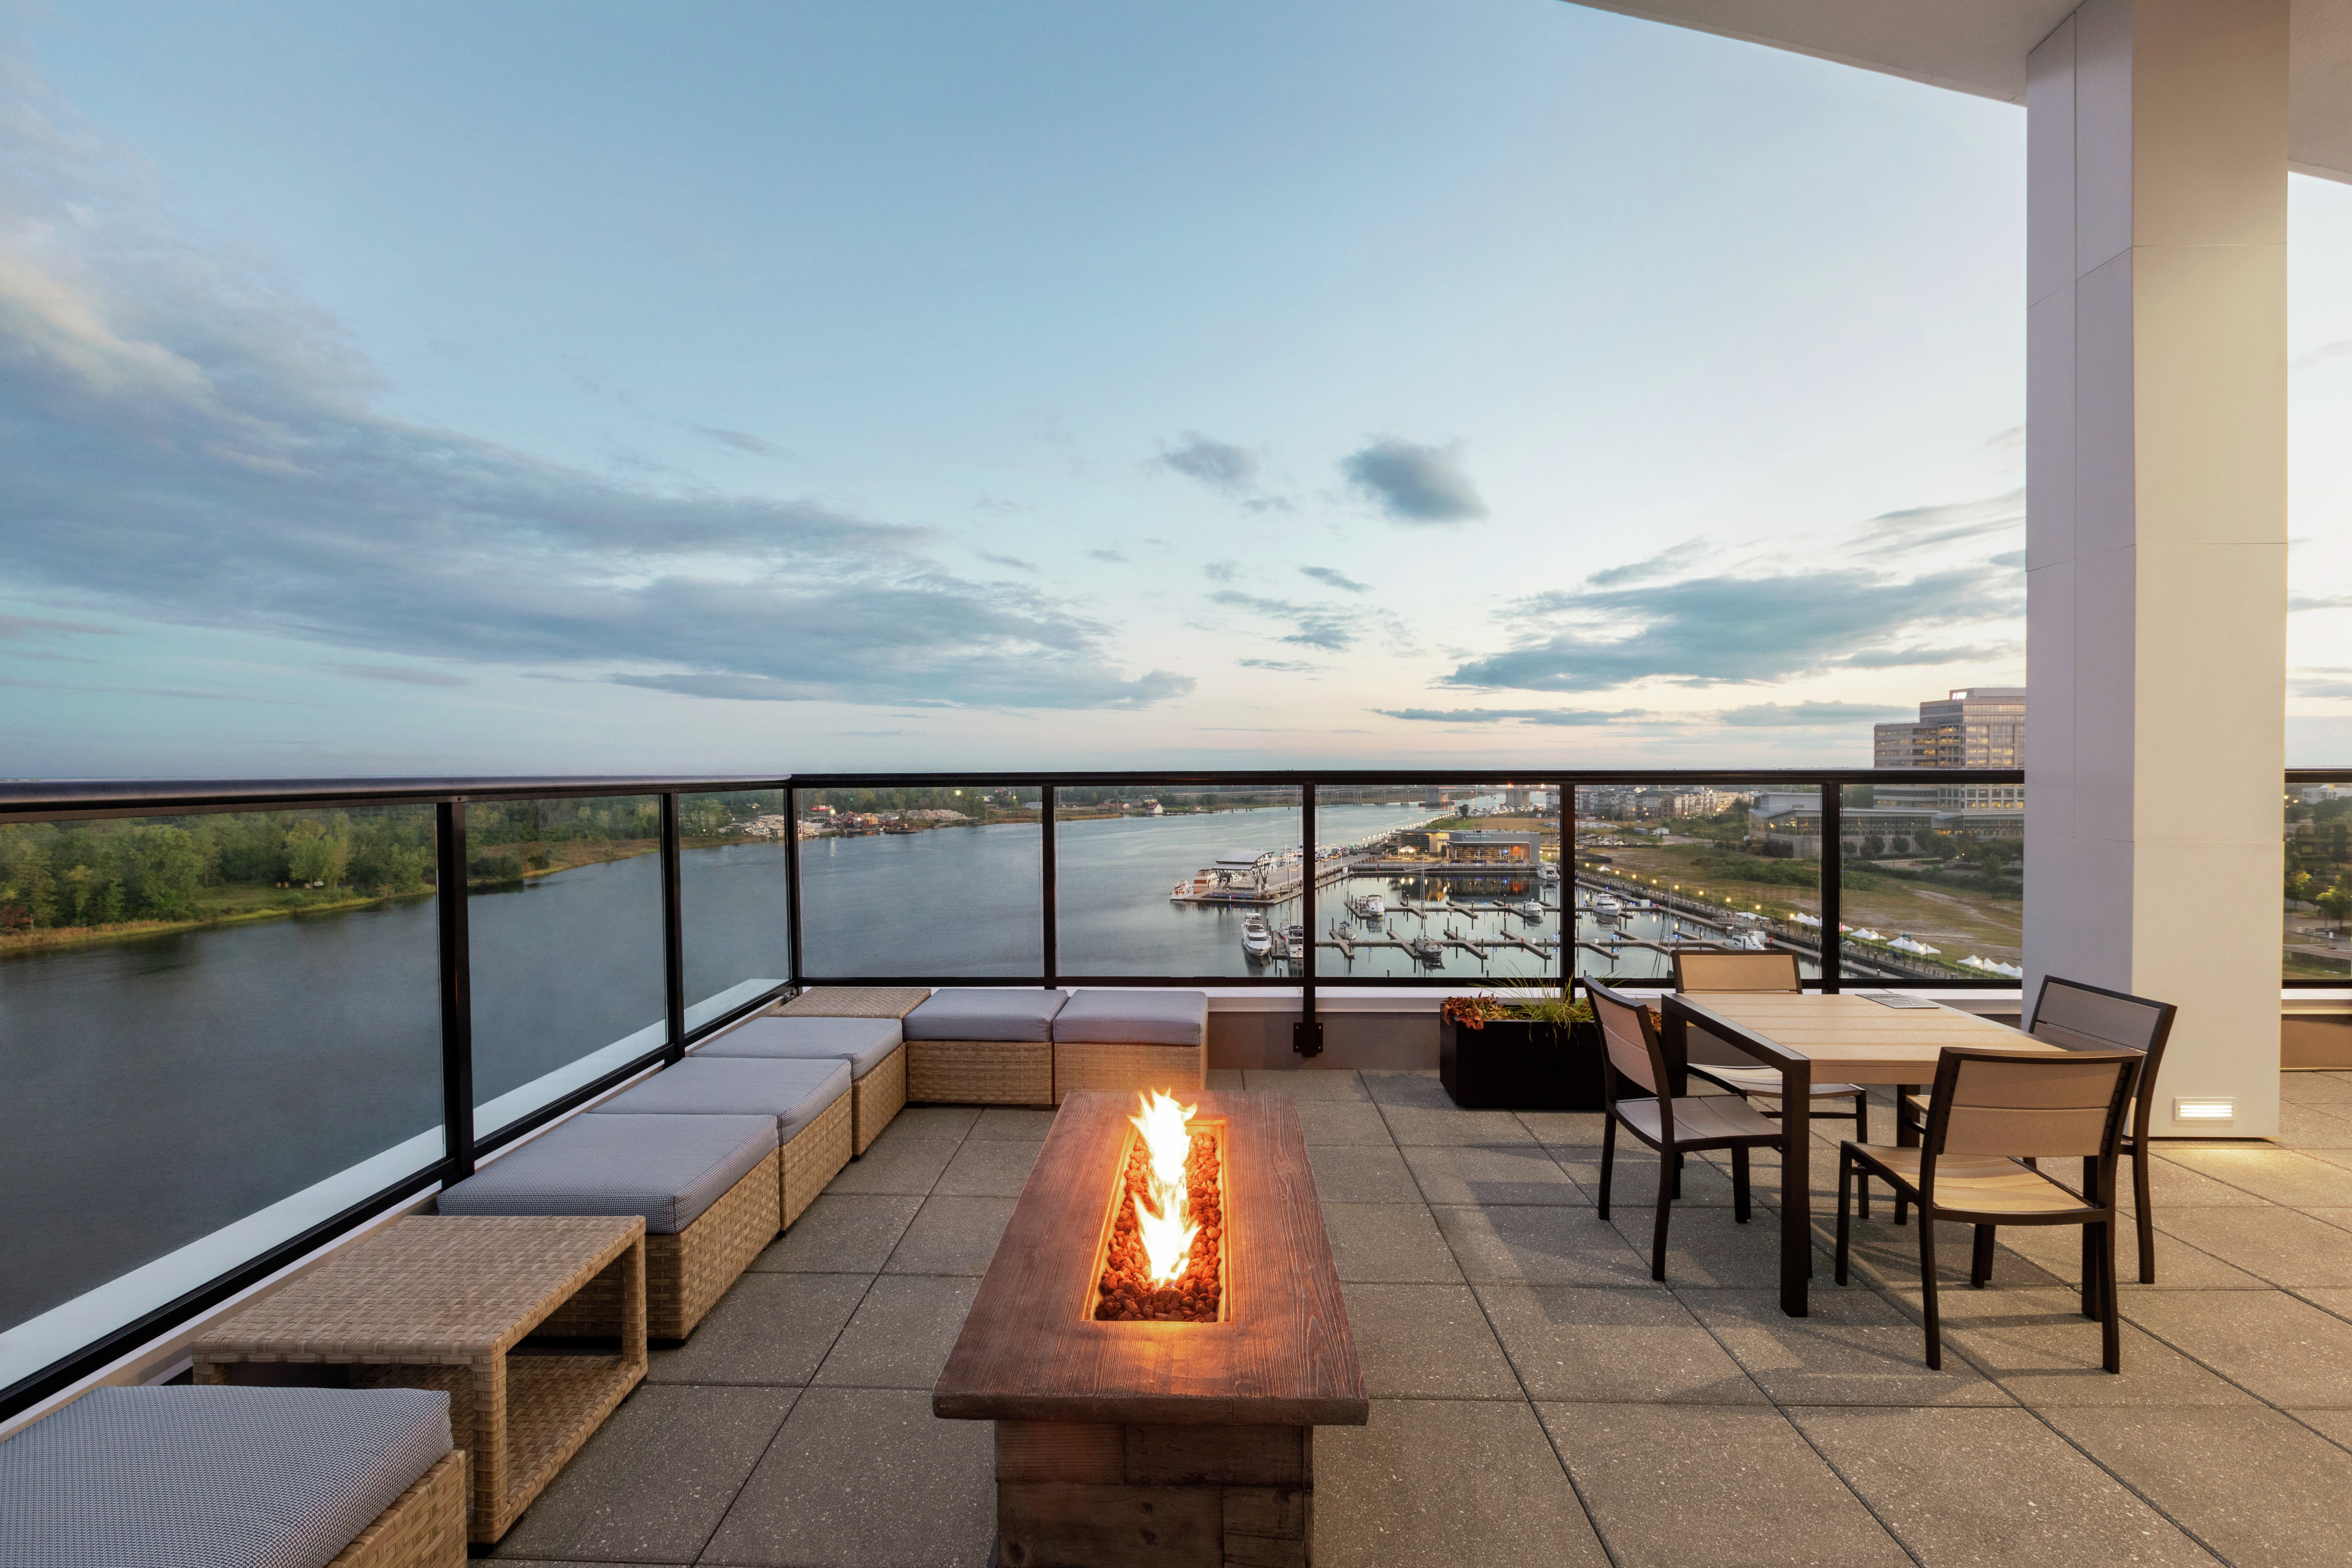 Rooftop Bar and Lounge Area with Scenic View